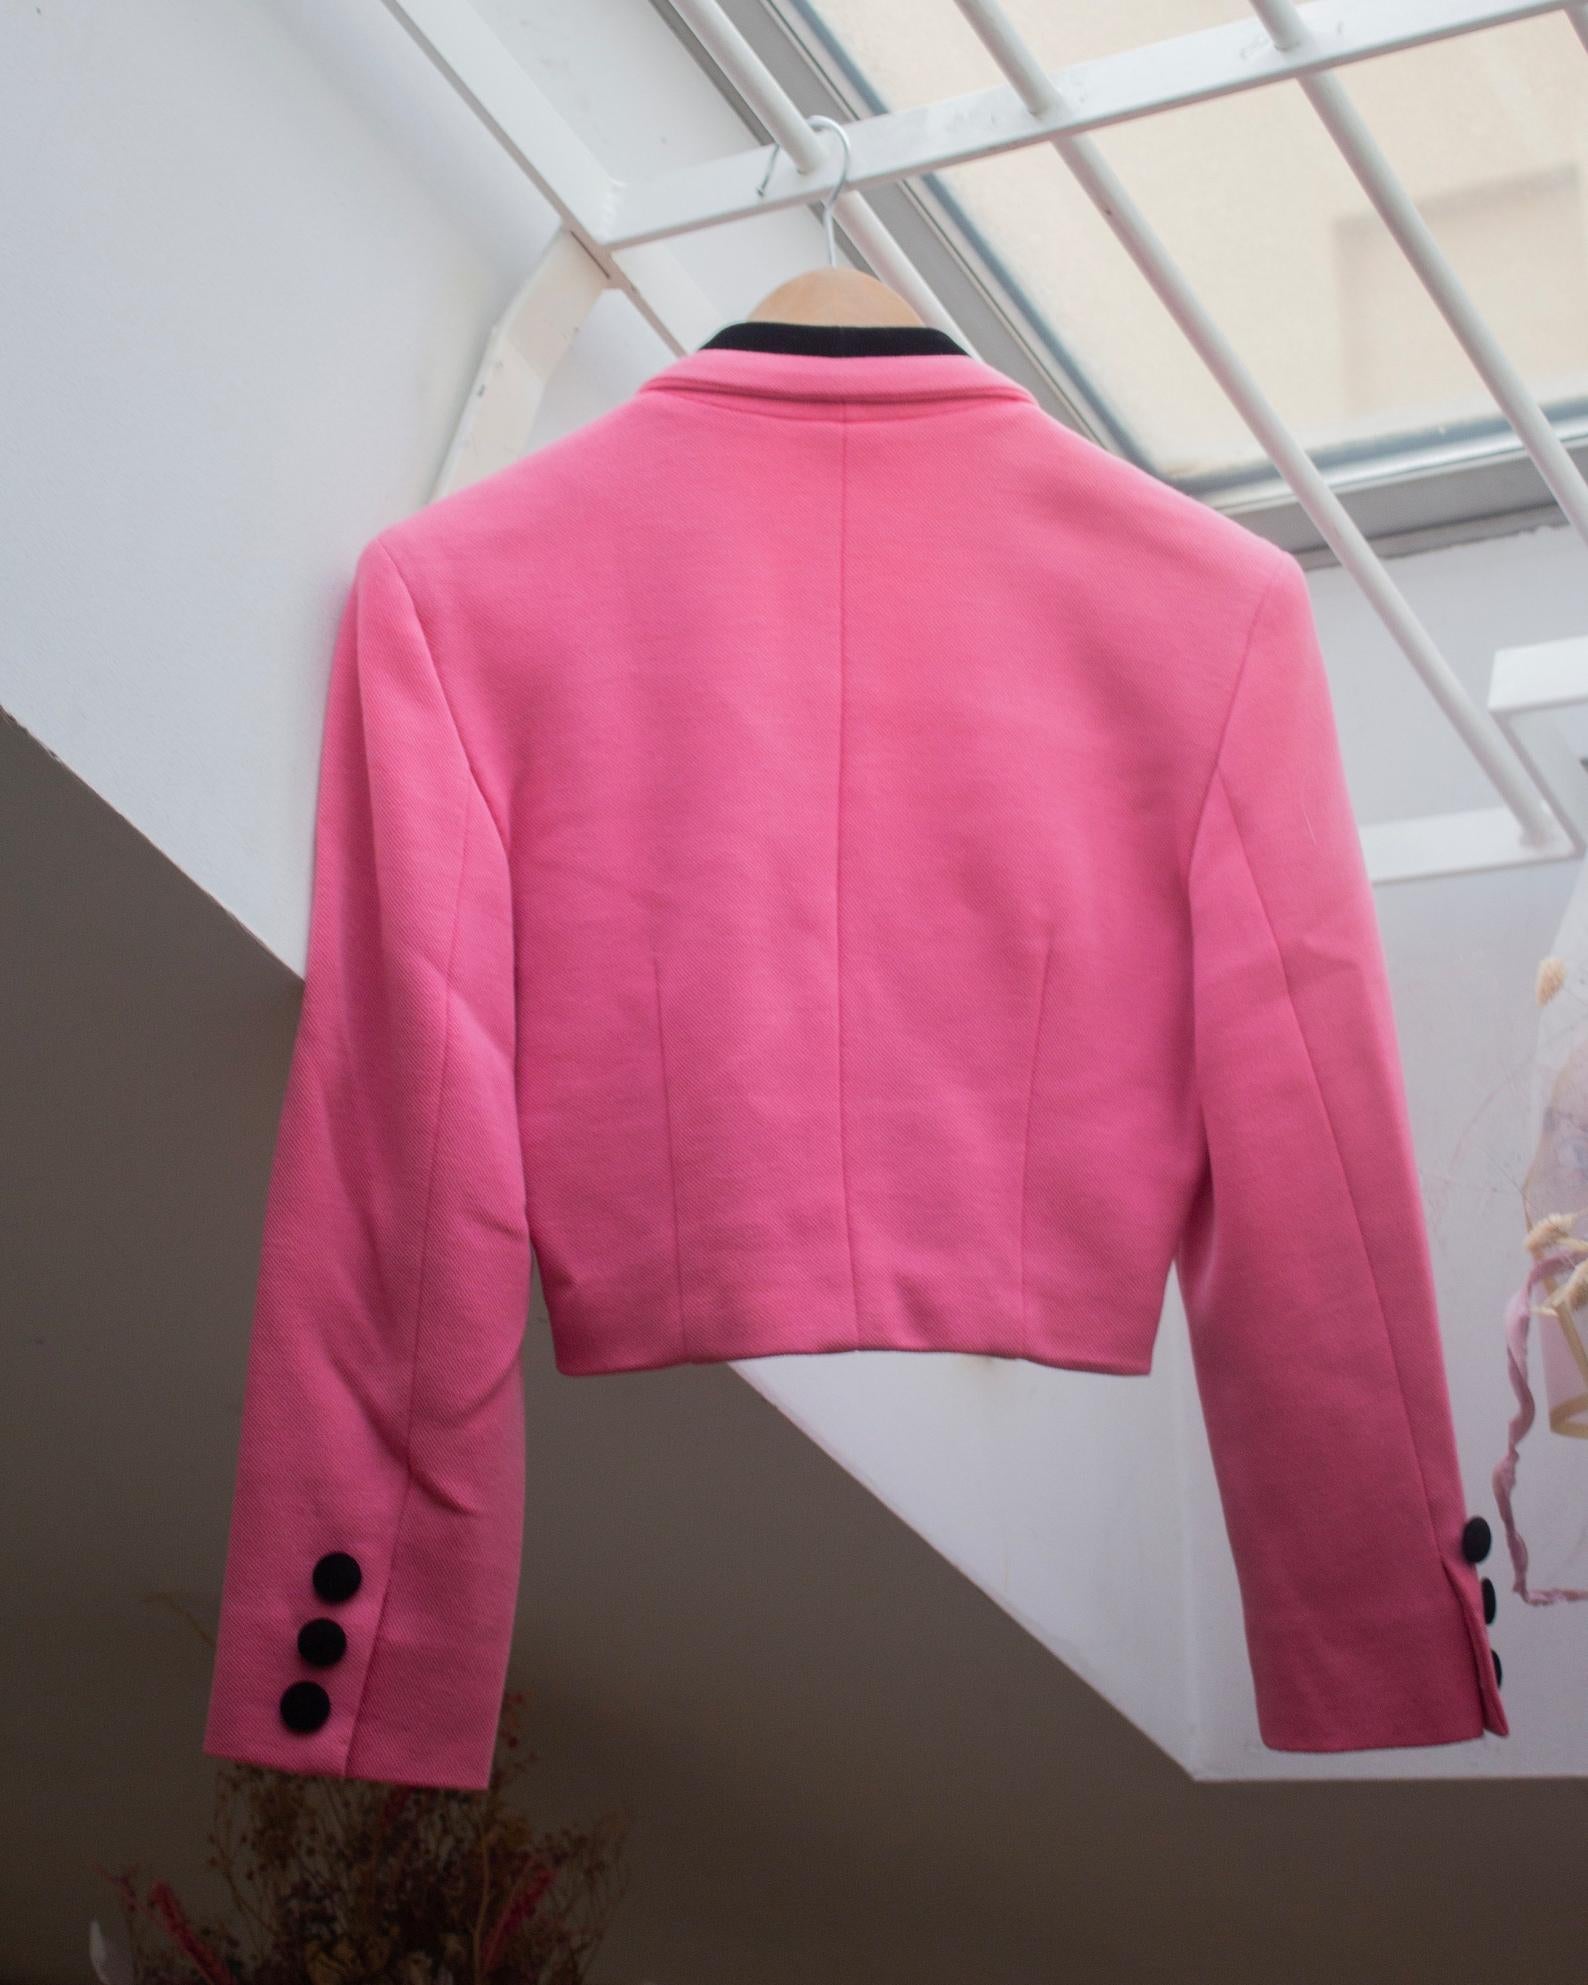 Christian Lacroix Prêt-a-porter early 90's pink wool cropped bolero jacket  In Excellent Condition For Sale In Milano, IT